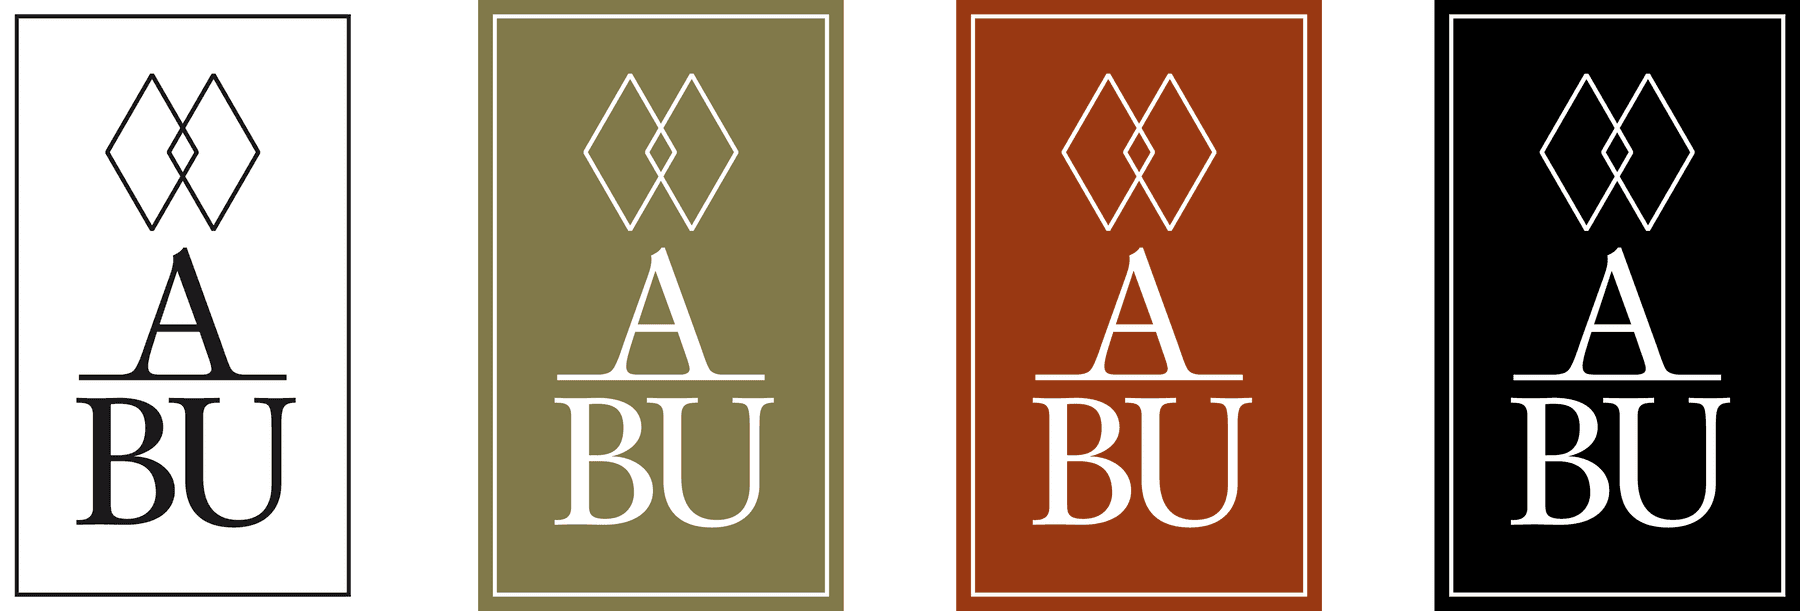 ABU Logos in four colors